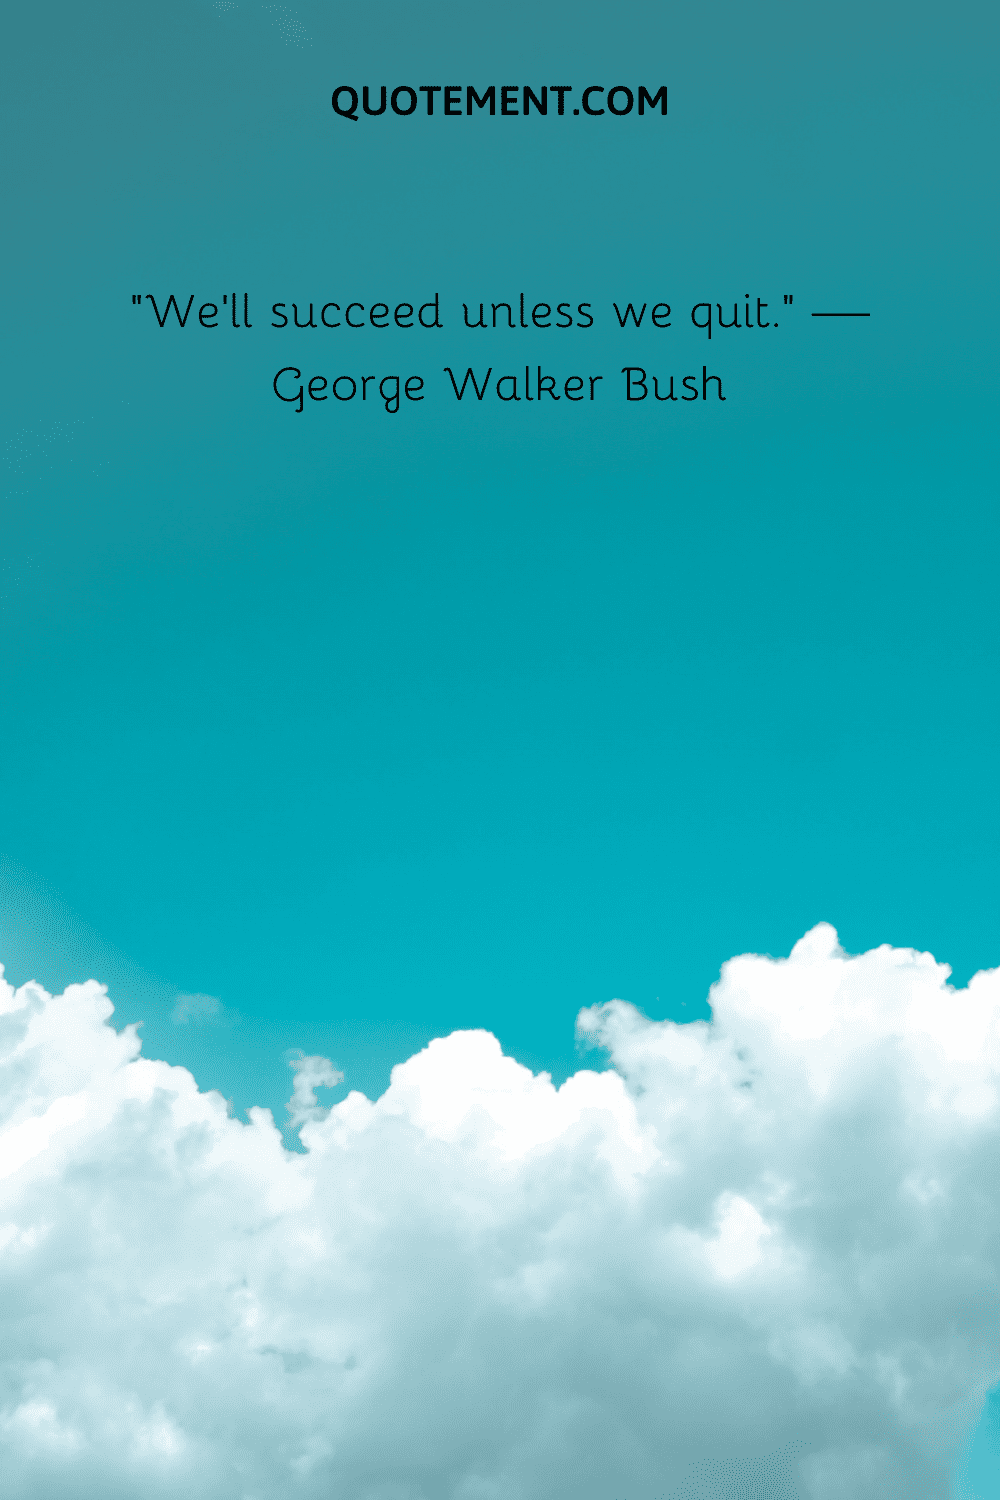 We’ll succeed unless we quit